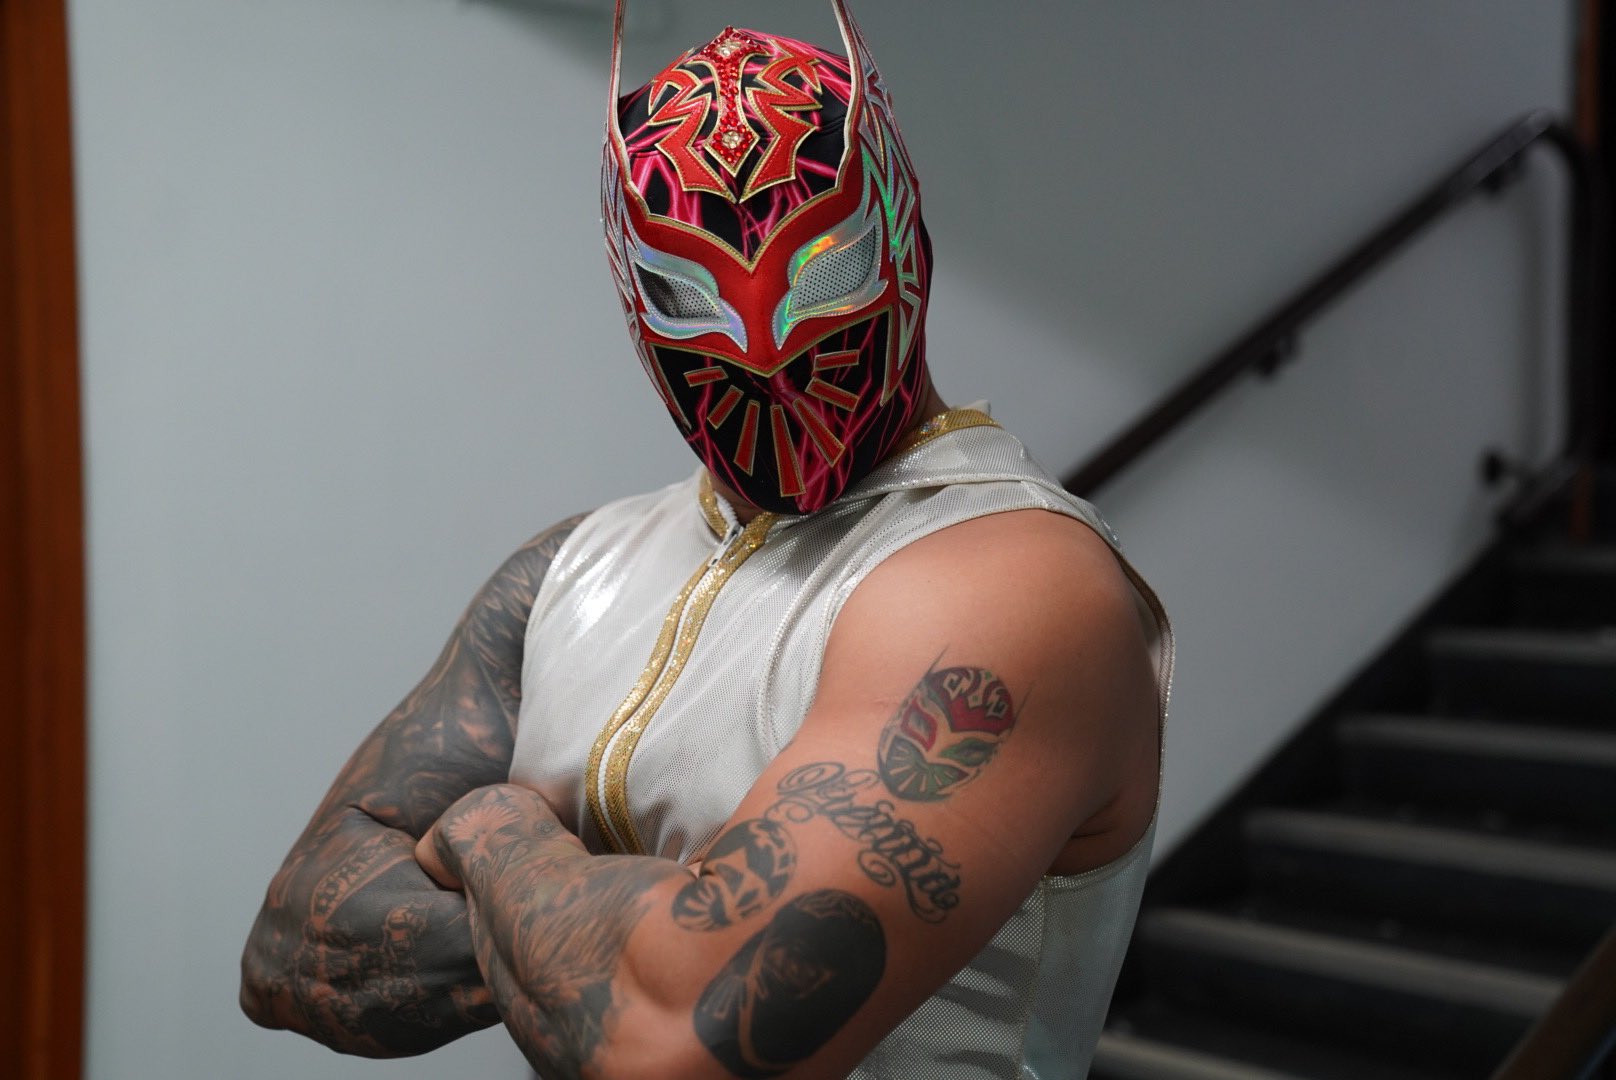 Sin Cara Finally Makes A Special Request The WWE!